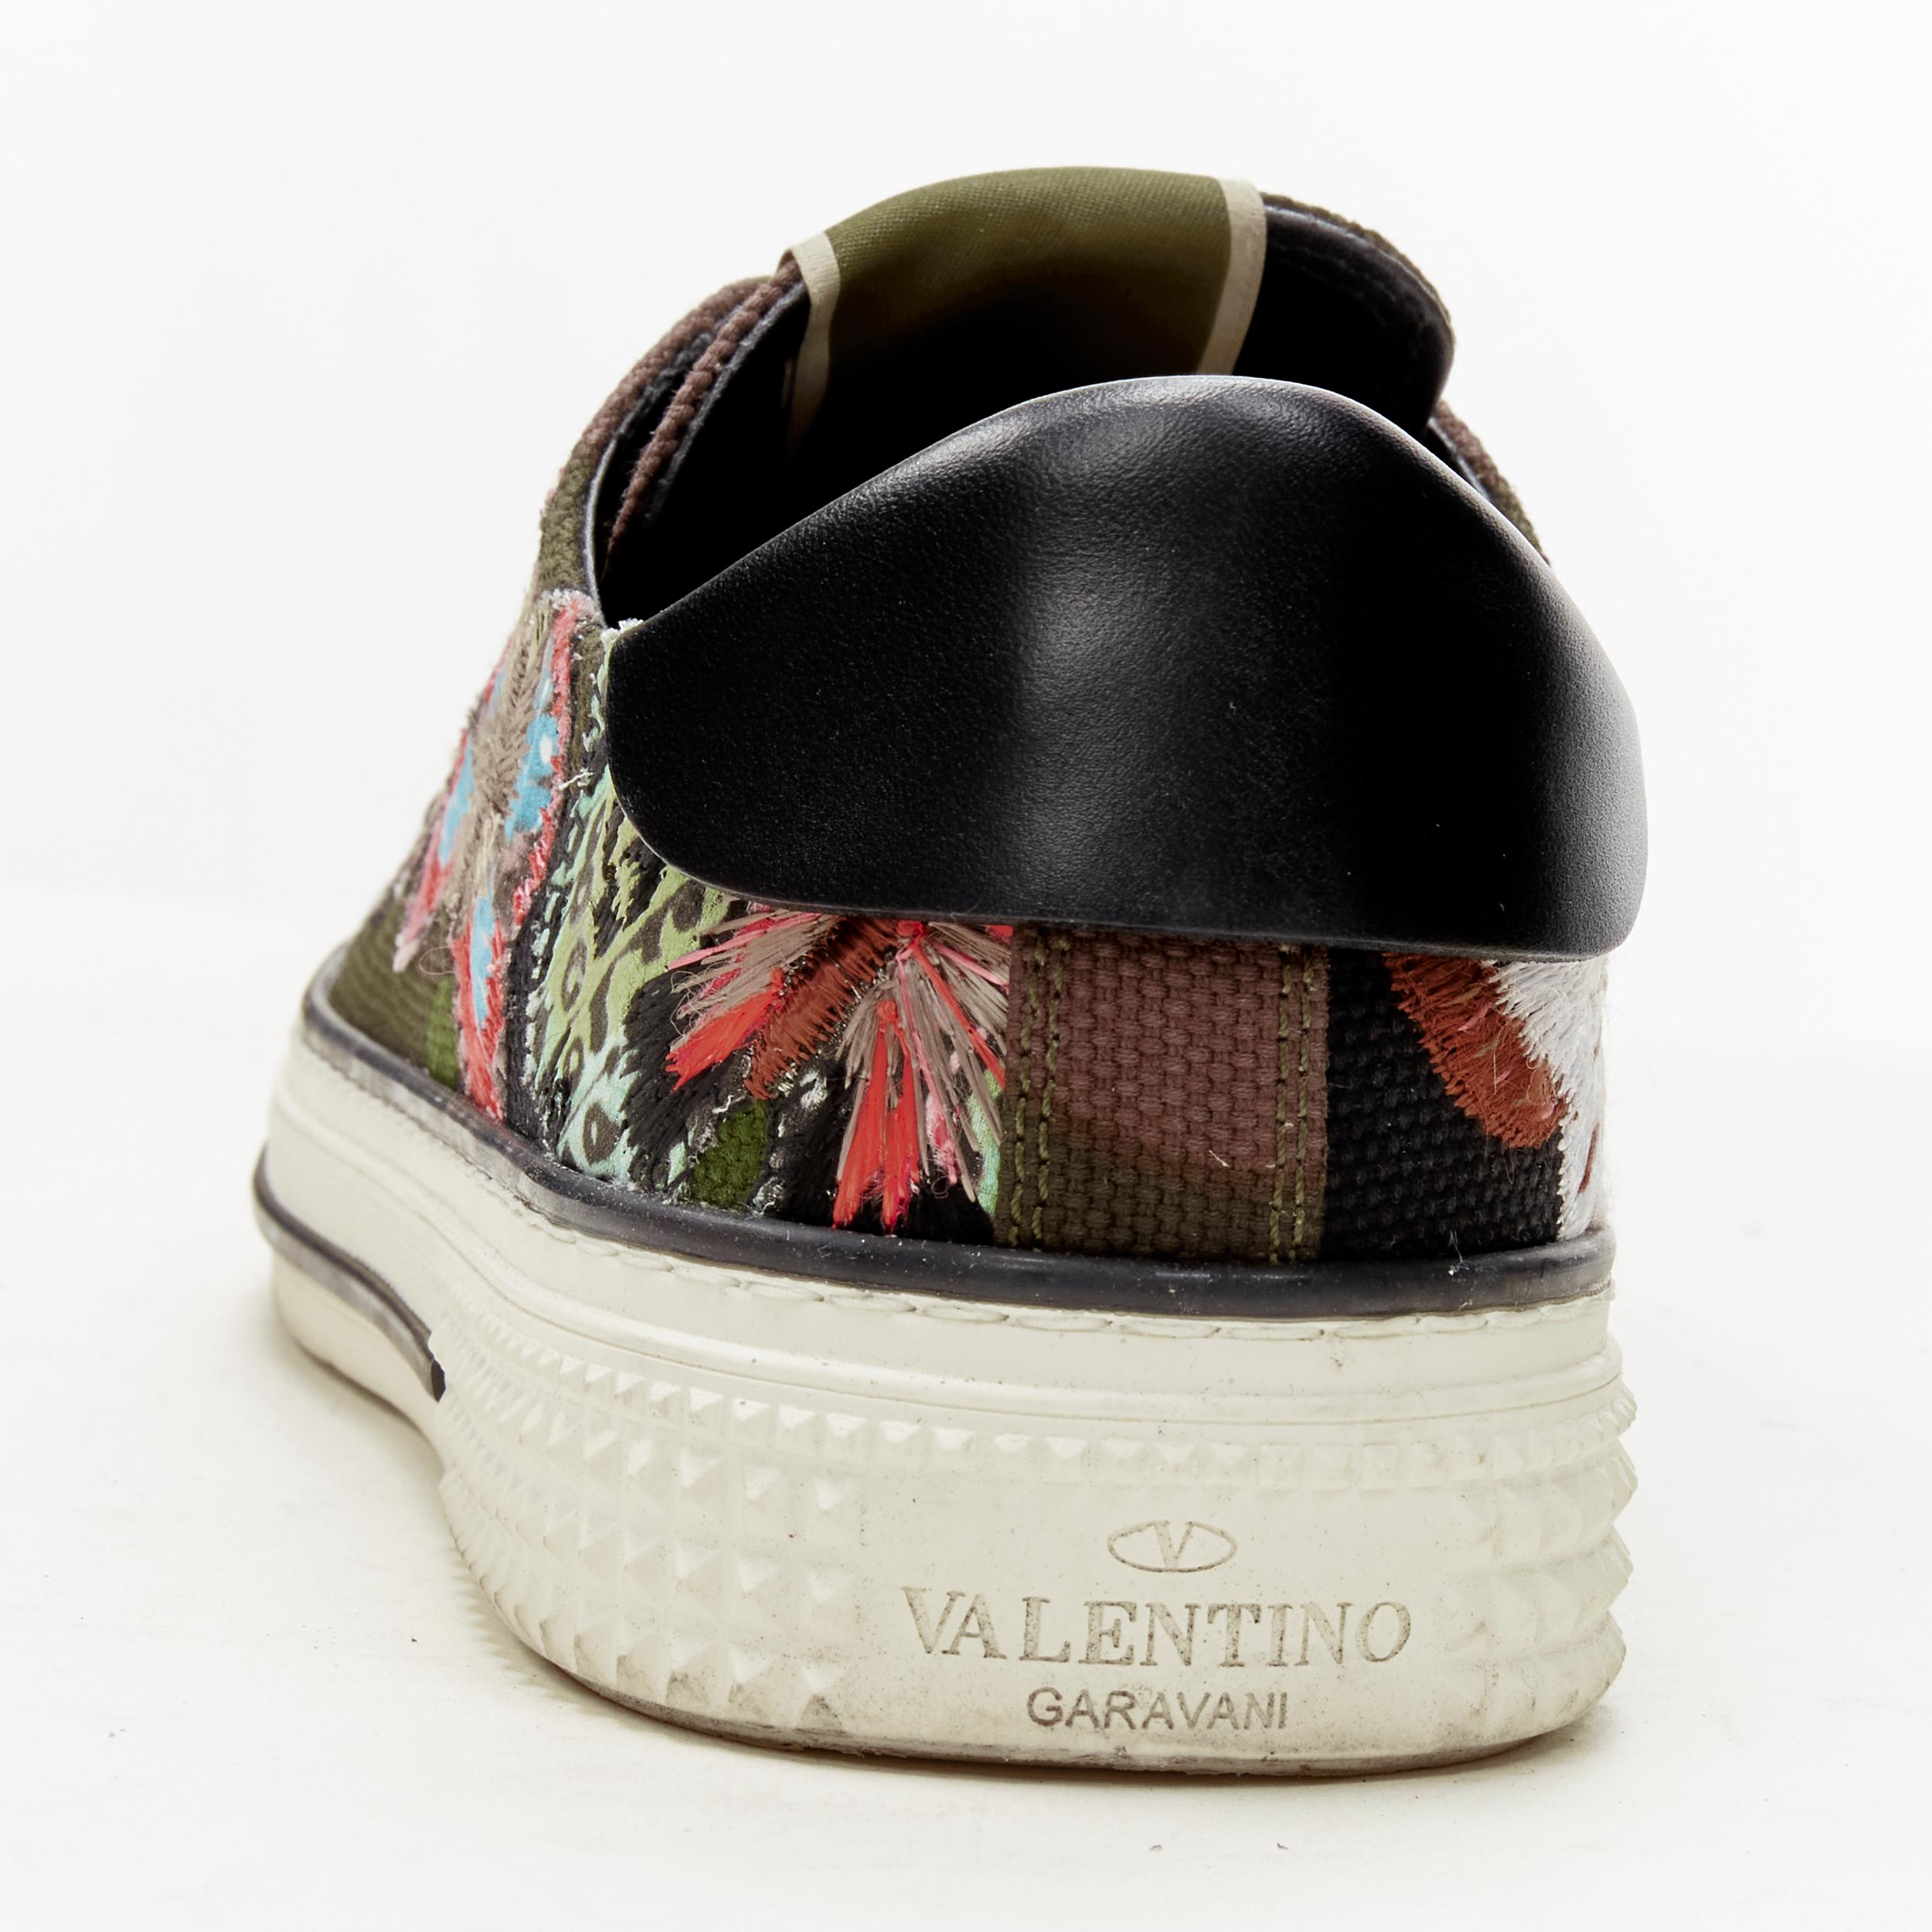 VALENTINO Butterfly embroidery green camouflage low top sneaker EU36 5